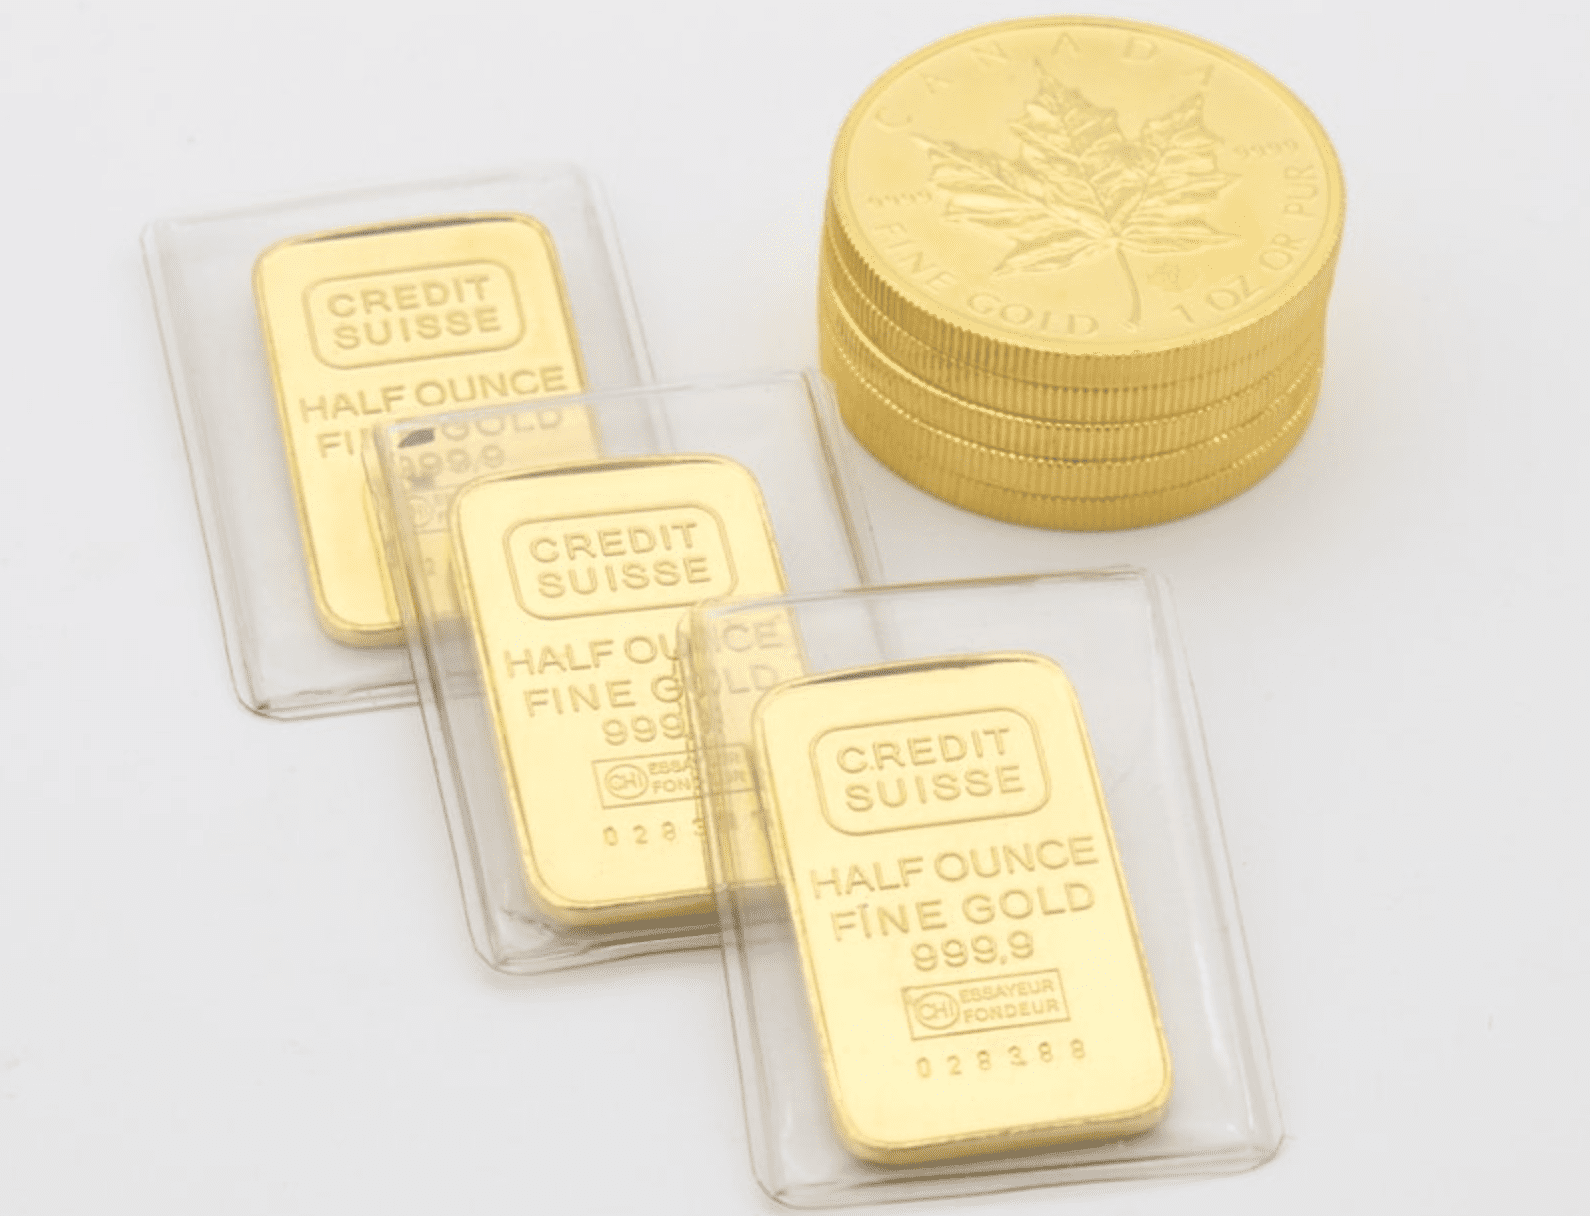 Gold canada maples coins next to gold bars